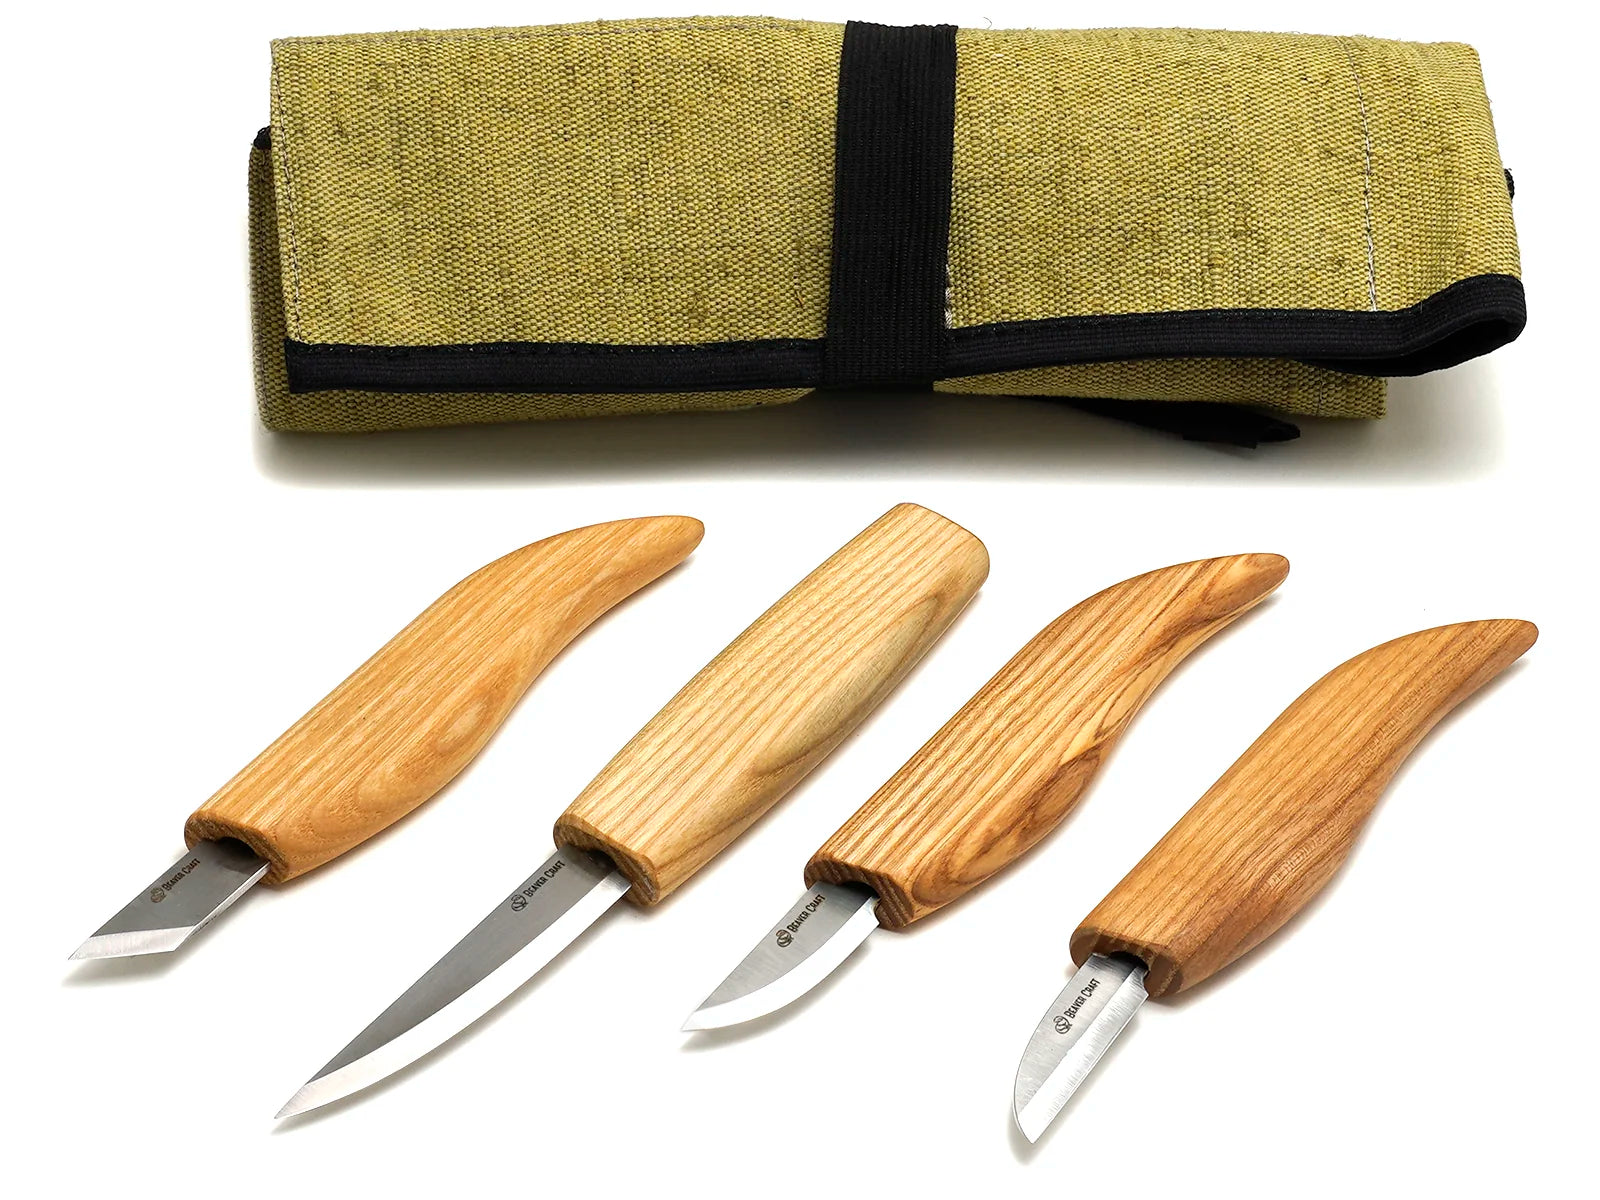 Woodcarving Tools Set TOP Carving Knives in a Book Case S07 BeaverCraft